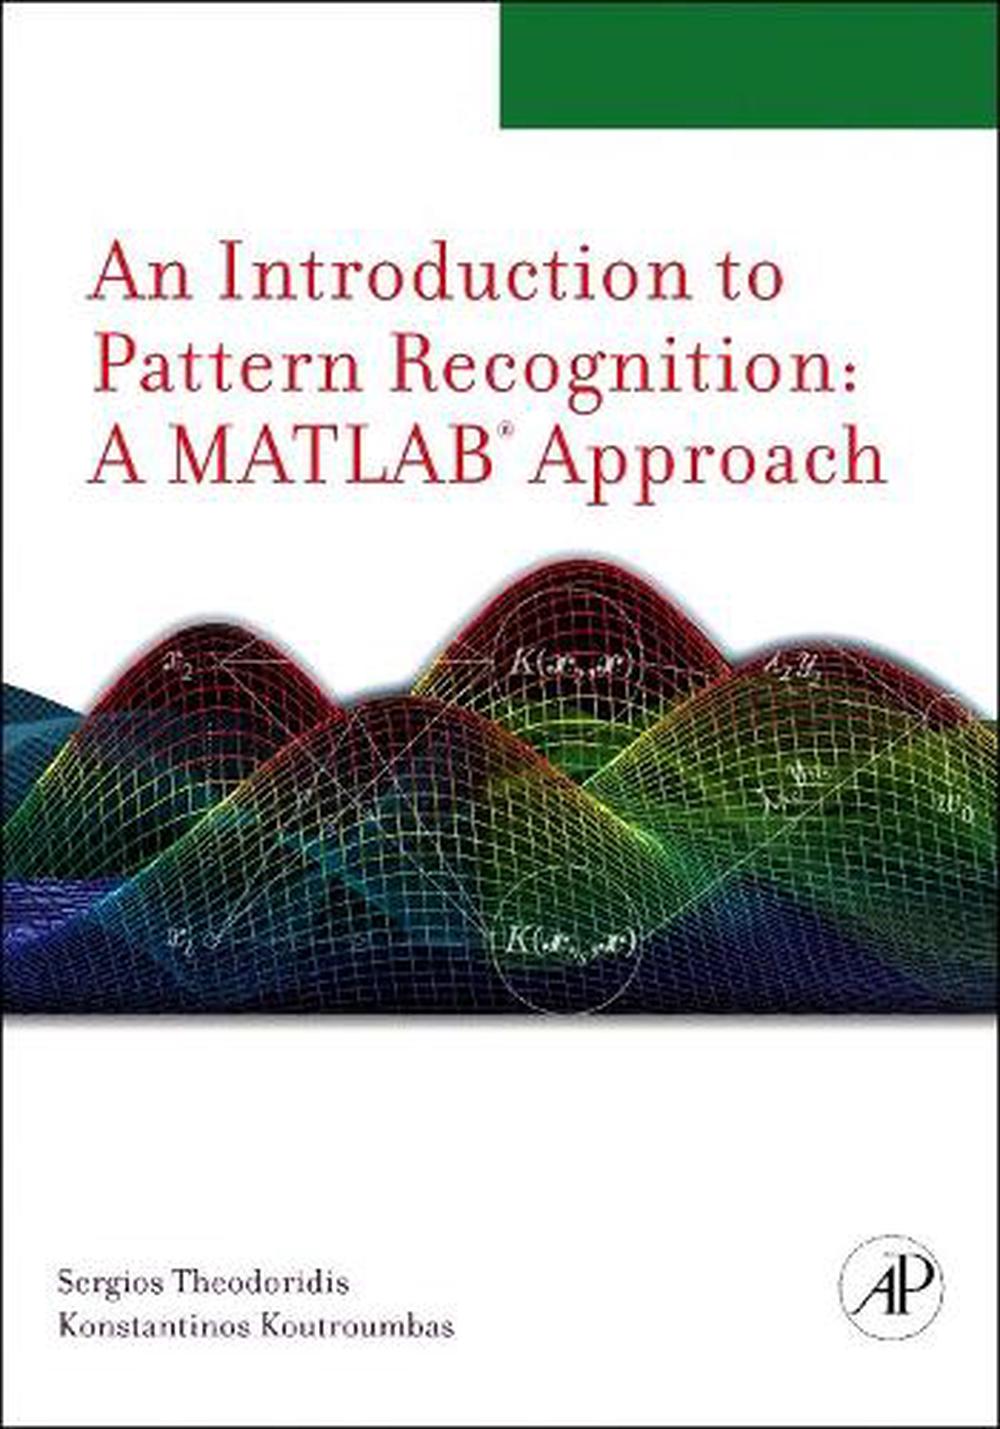 Introduction to Pattern Recognition A MATLAB Approach by Sergios Theodoridis (E 9780123744869